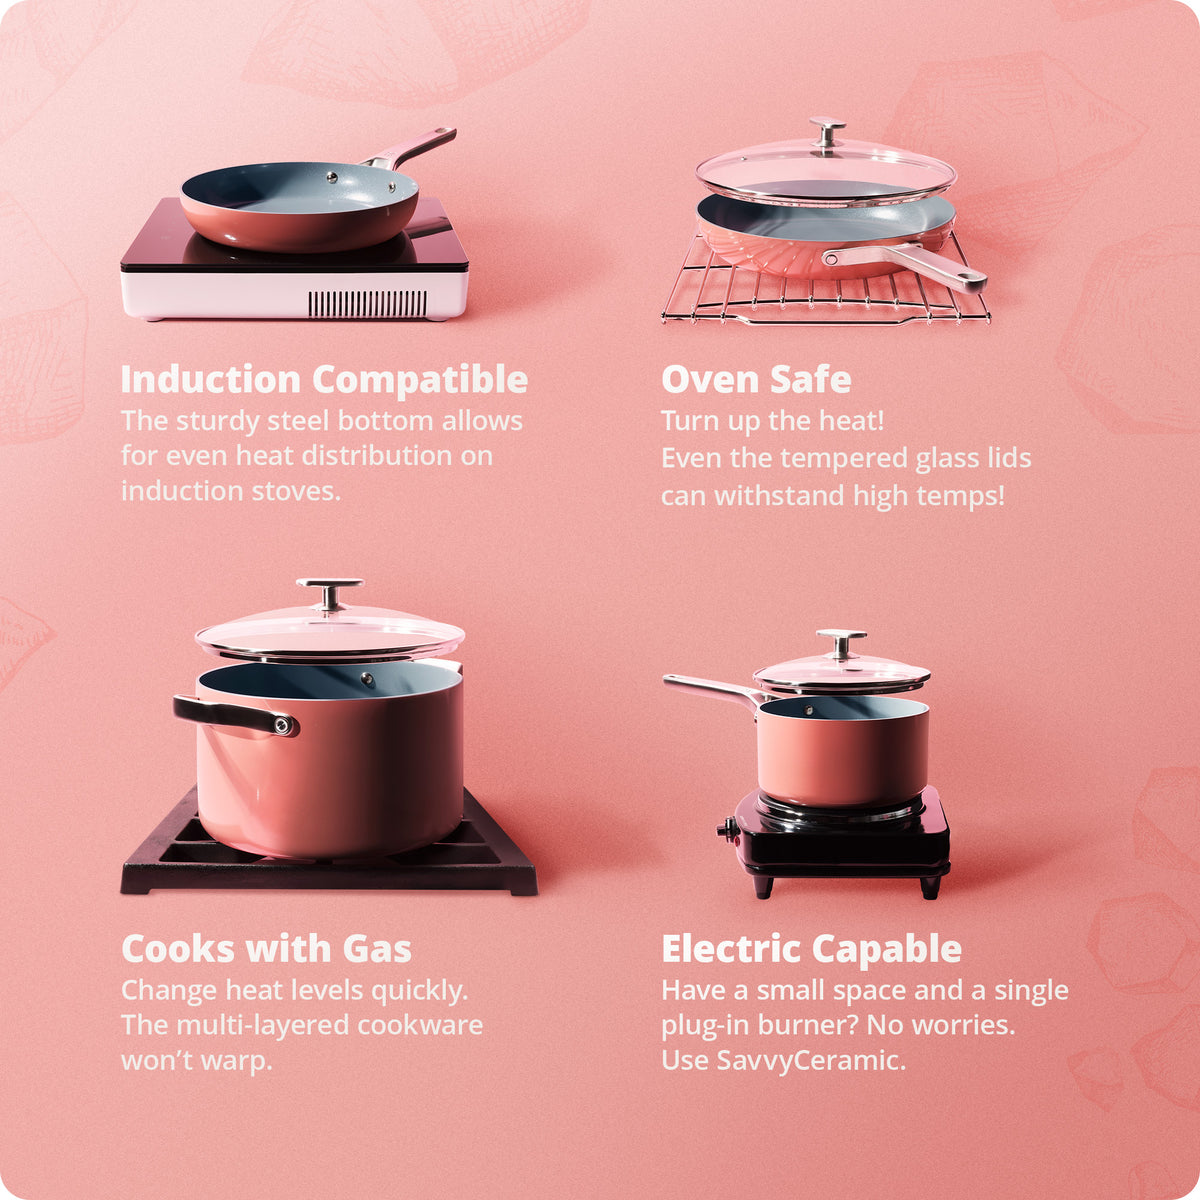 Super Natural Non-Stick: Naturally Derived Ceramic, Abnormally Slick, Easy Cleanup, Extraordinarily Built (Pink)